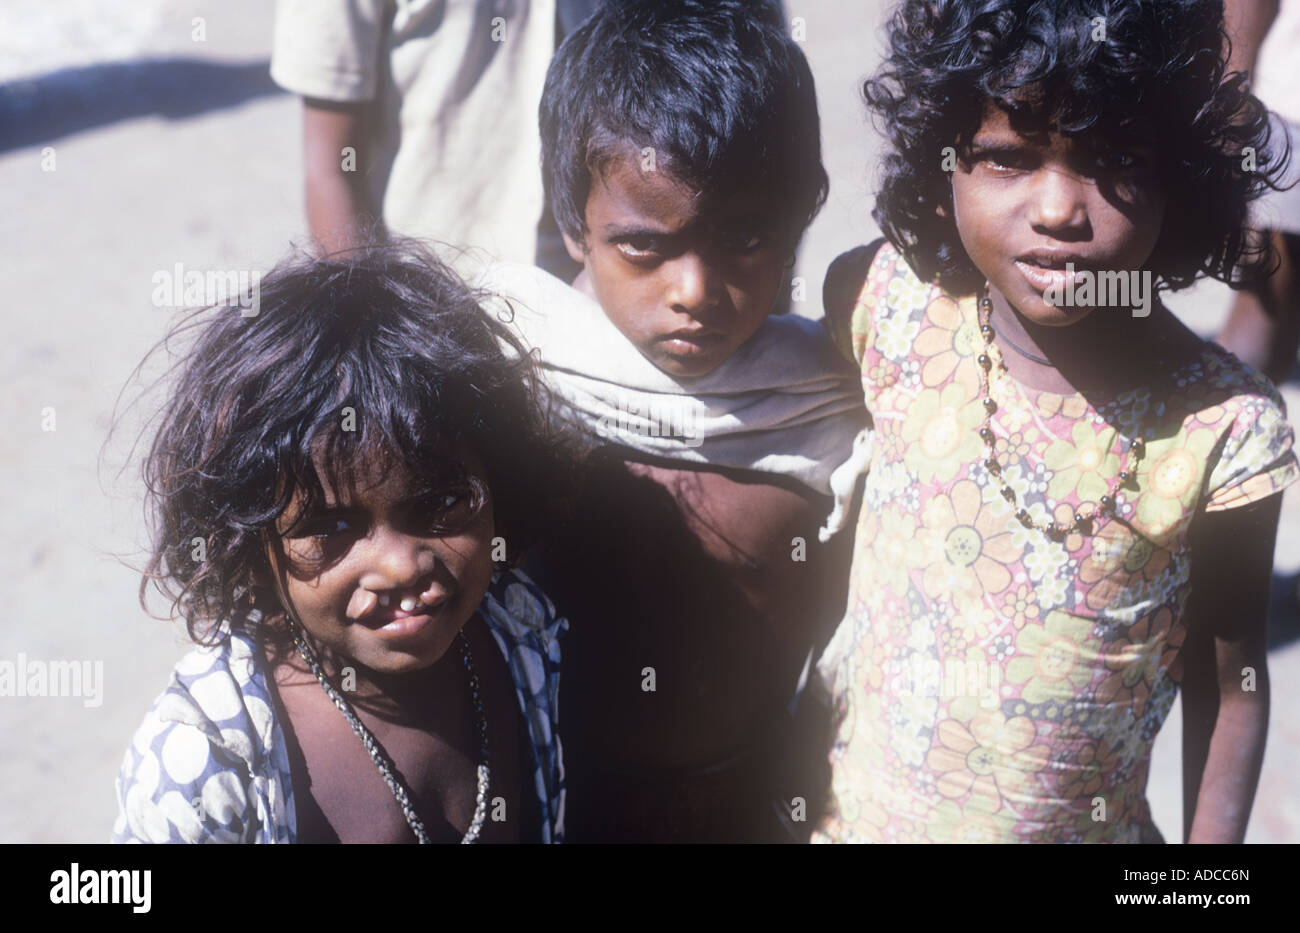 Girl with hair lip, or cleft palate, and other street children in Mumbai India Stock Photo